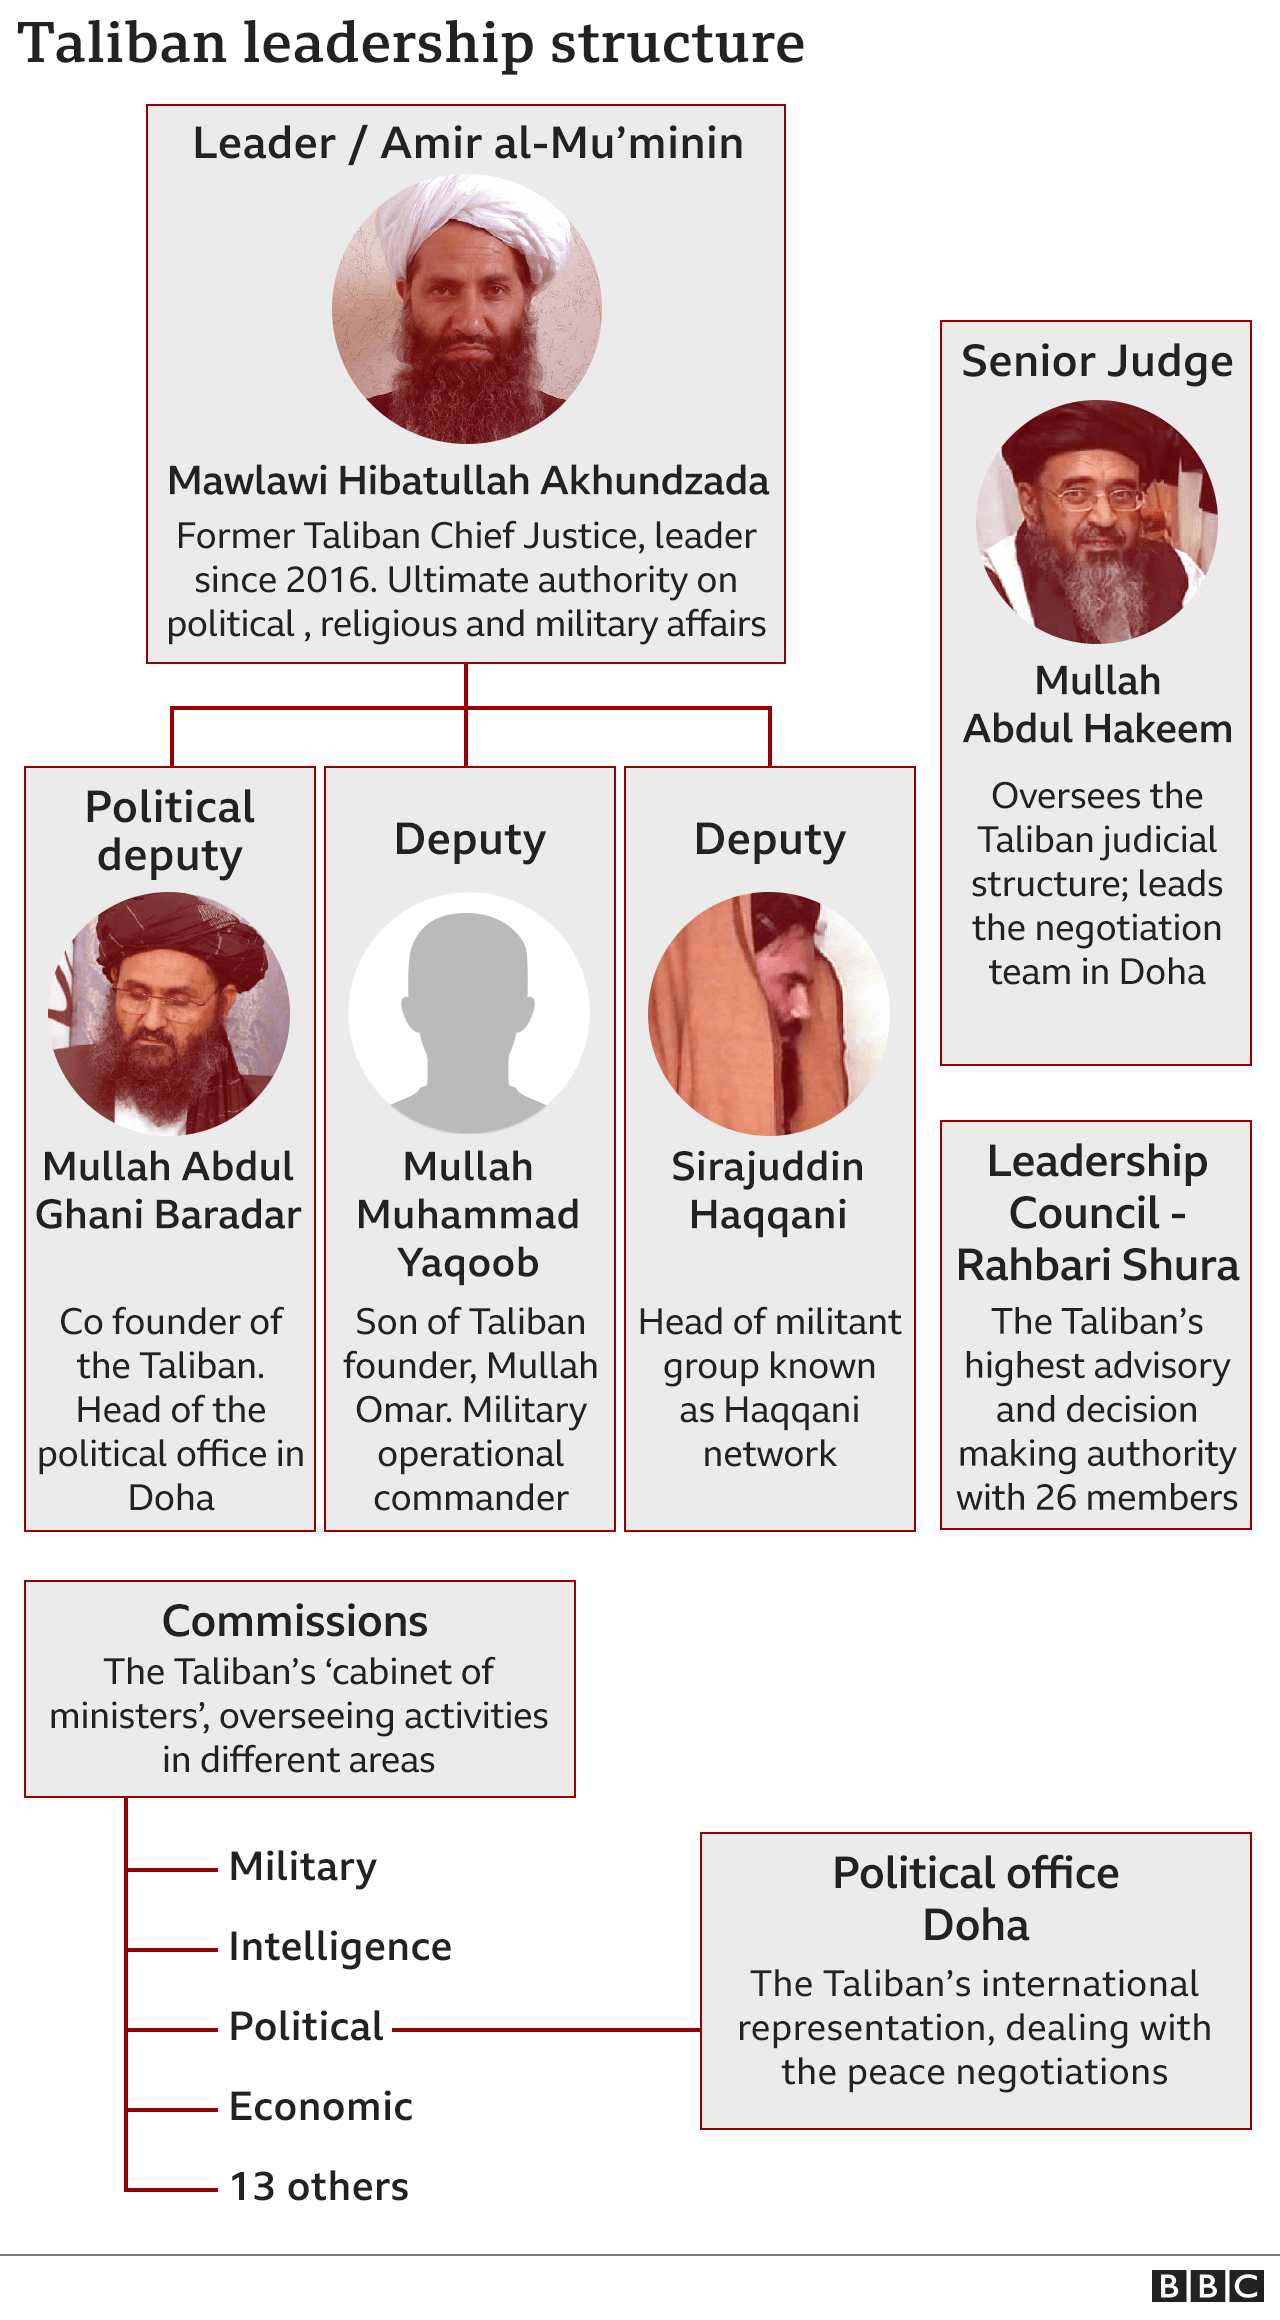 Graphic shows Taliban leadership structure